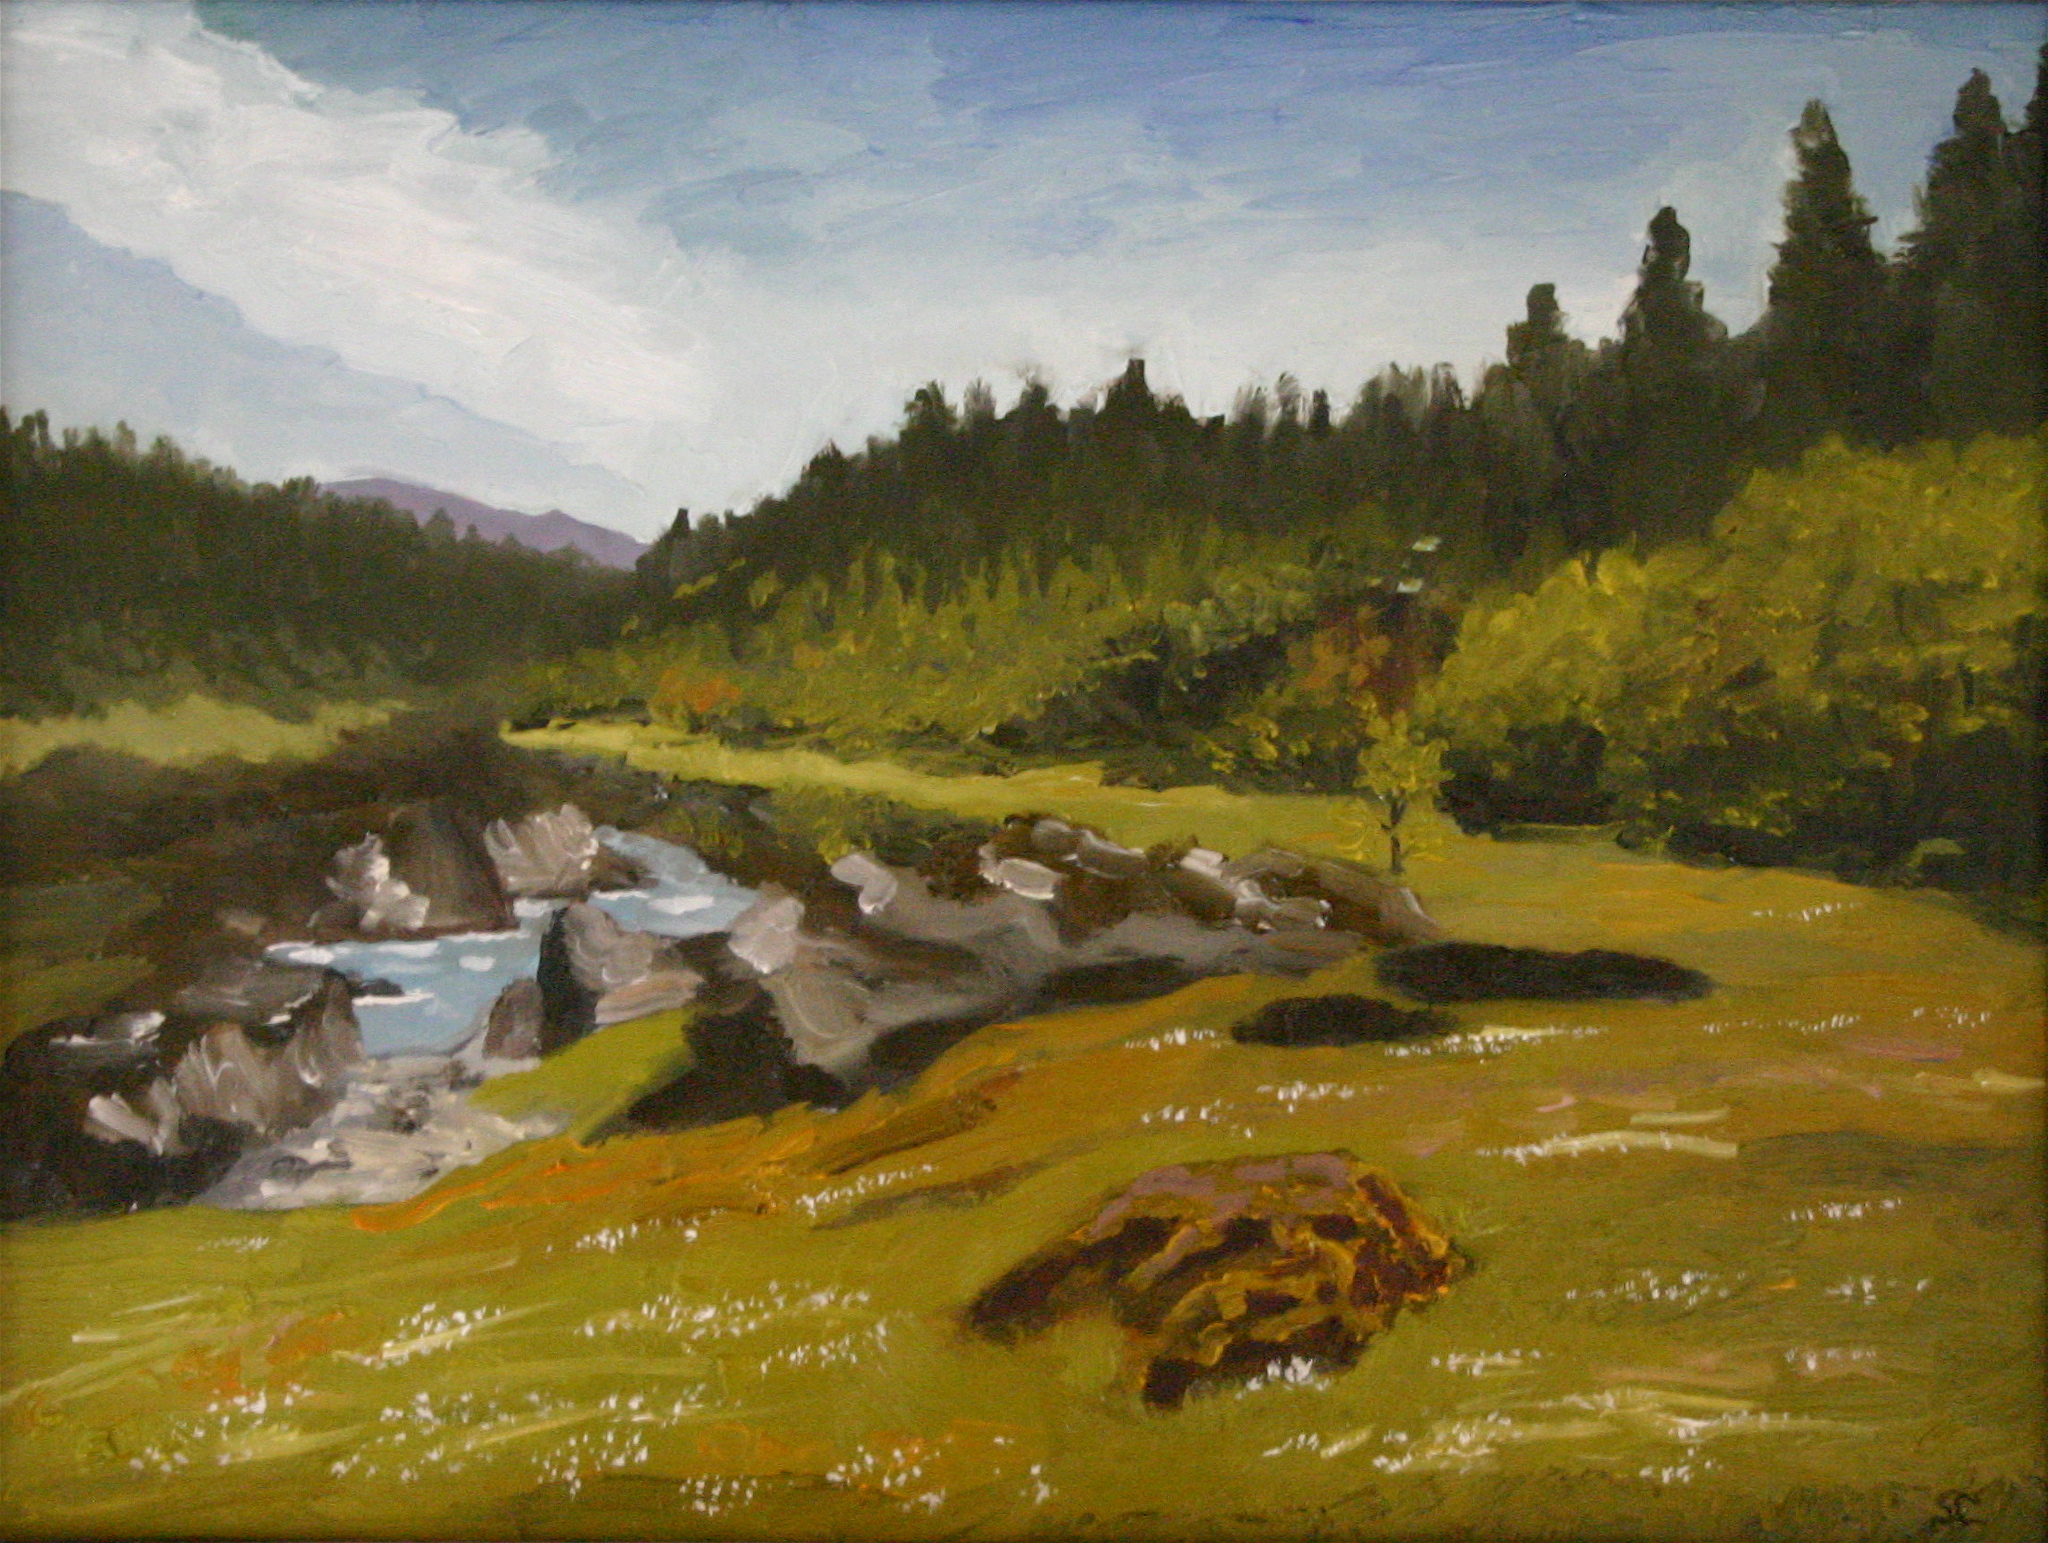 "Eel River" oil on panel 16 x 20 sold